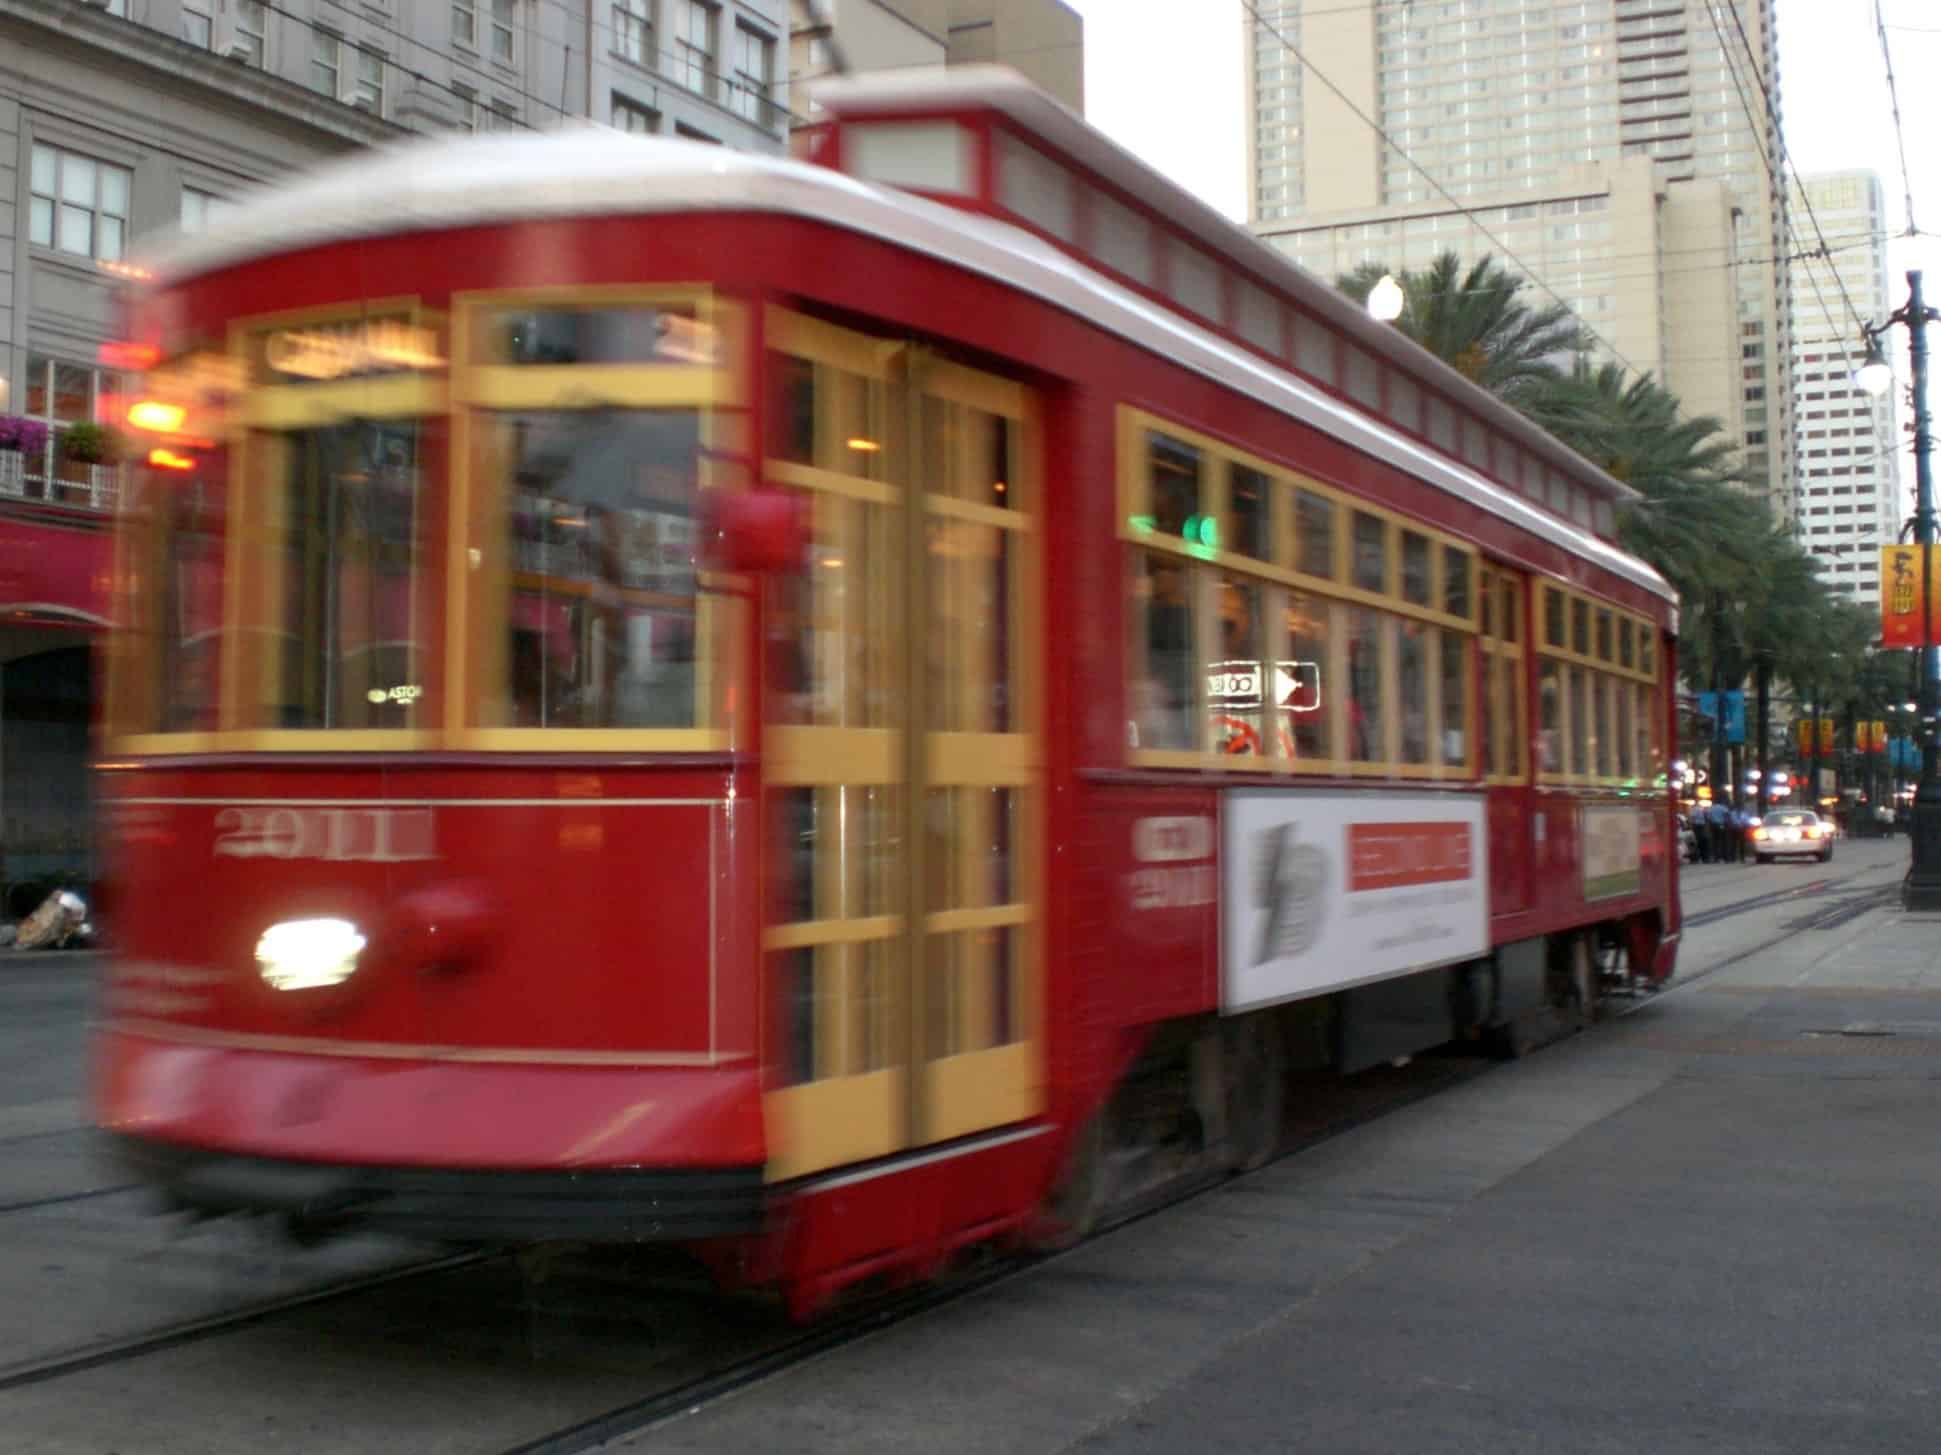 Don't forget to tide on a tram in New Orleans